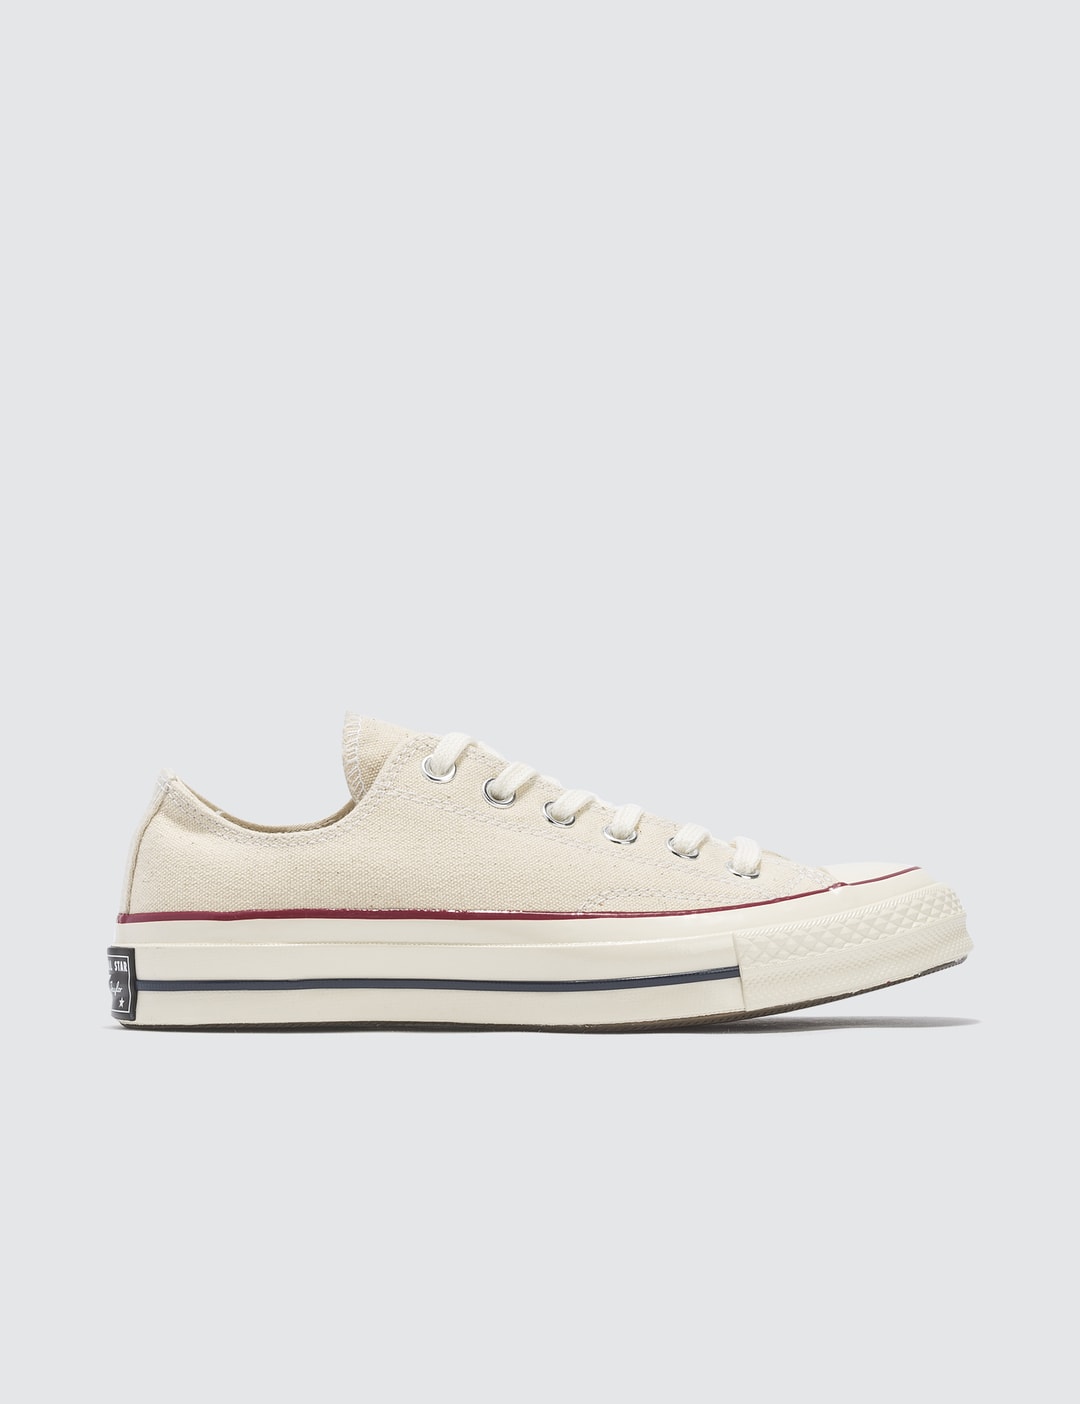 Converse - Chuck Taylor All Star '70 Ox | HBX - Globally Curated ...